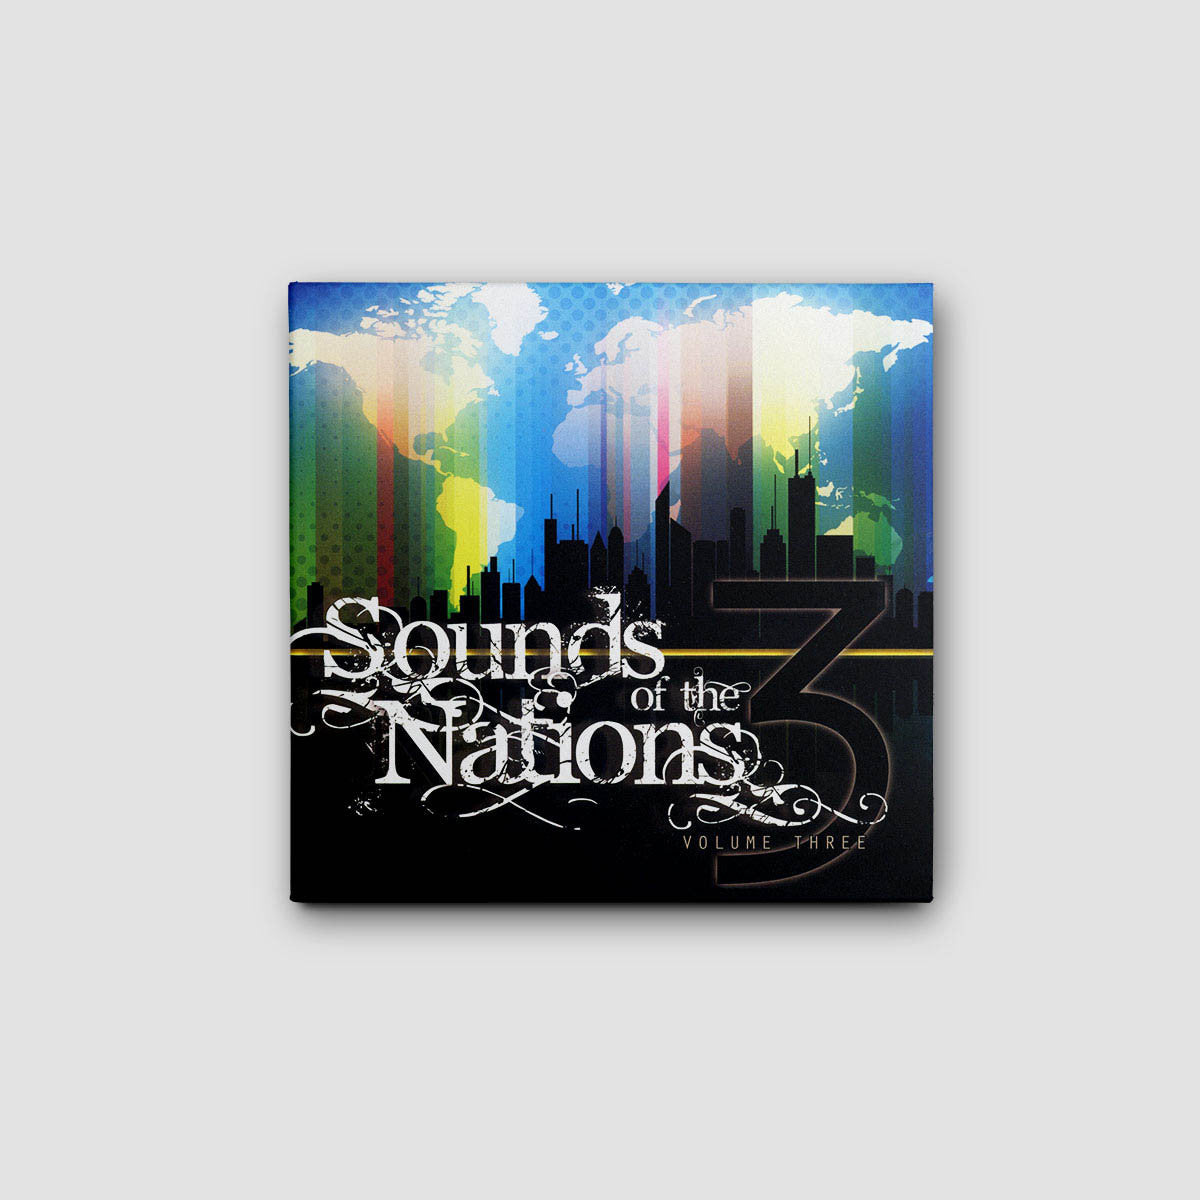 Sounds of the Nations Volume 3